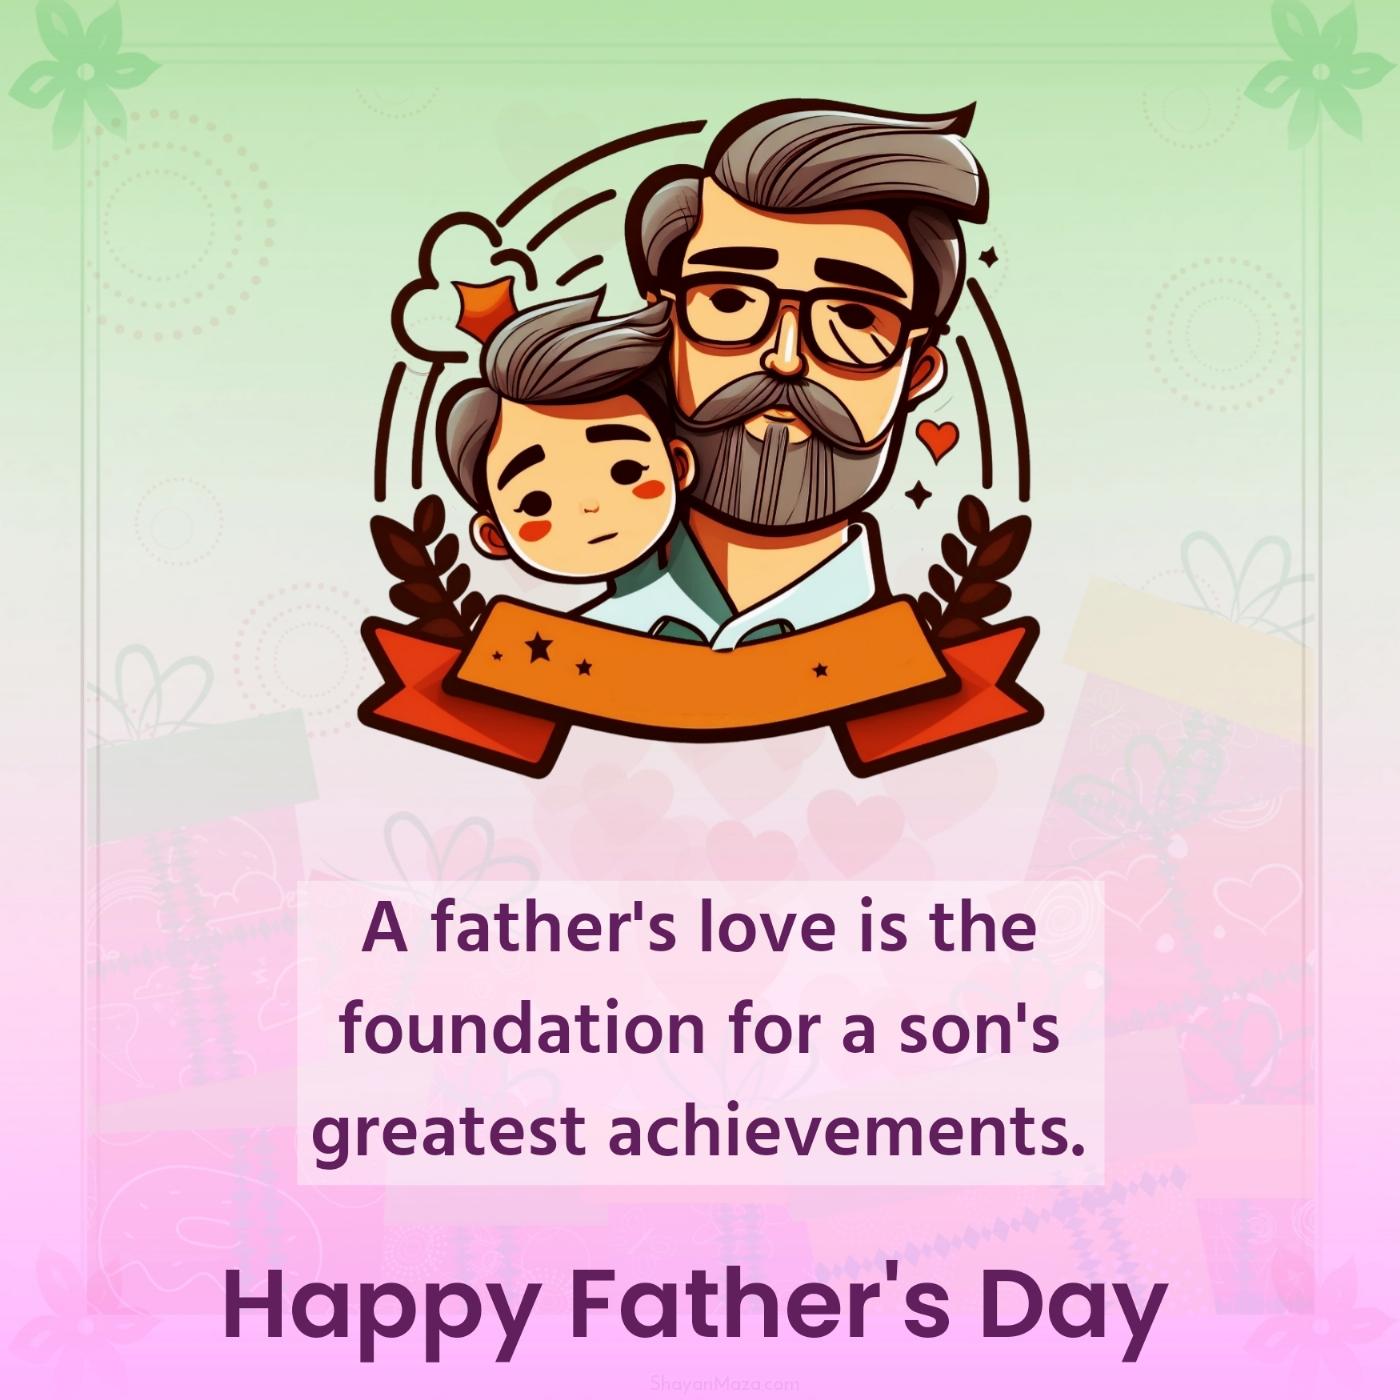 A father's love is the foundation for a son's